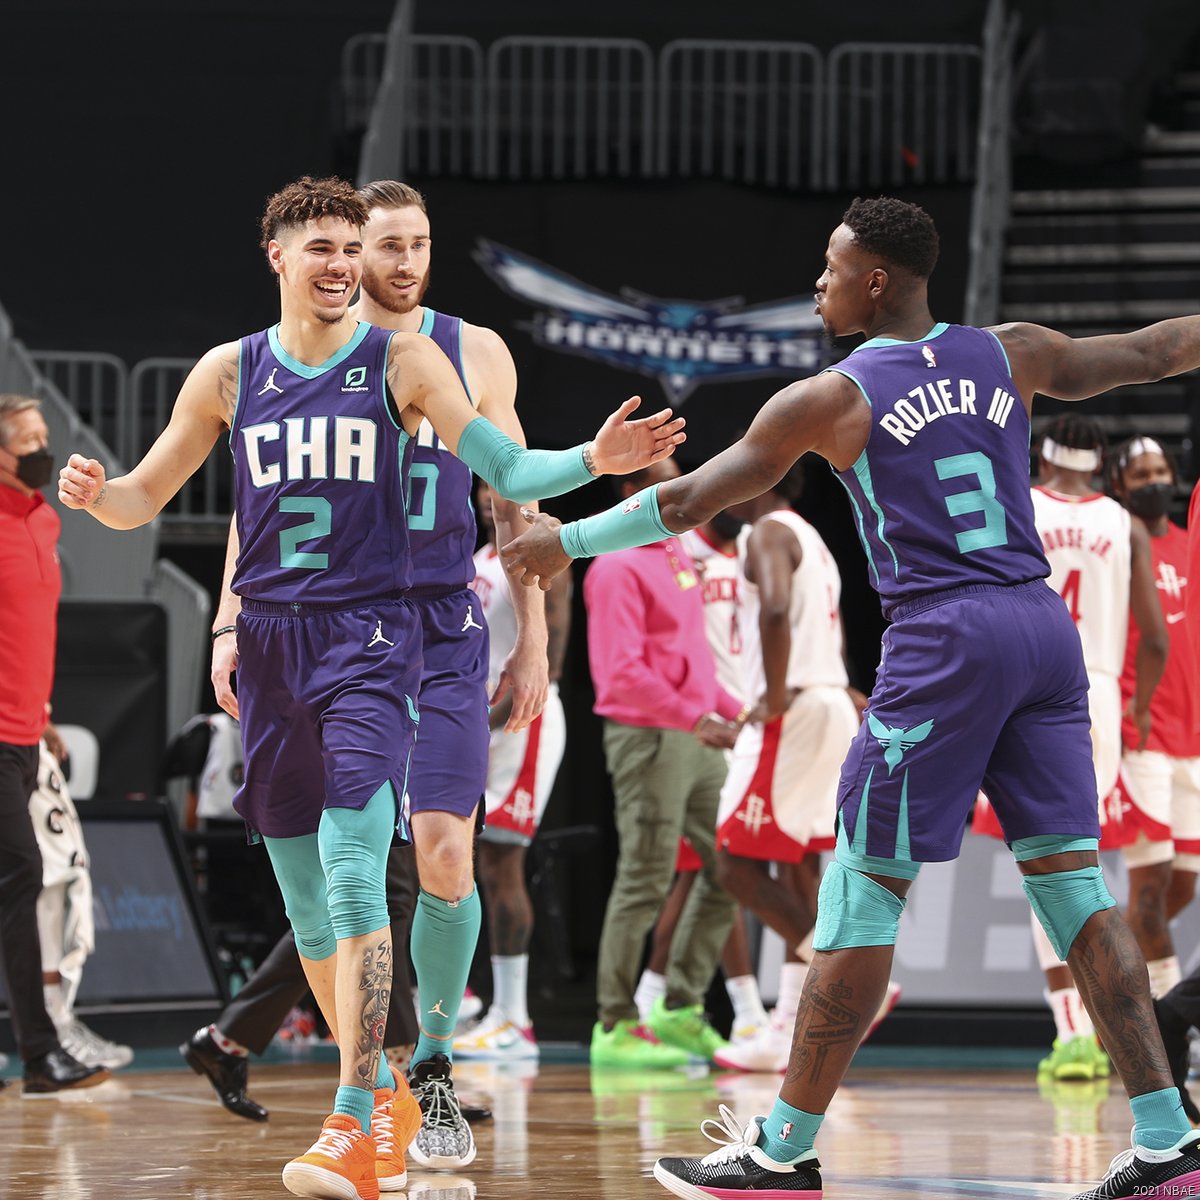 Gordon Hayward on his Hornets tenure: 'It's been up and down